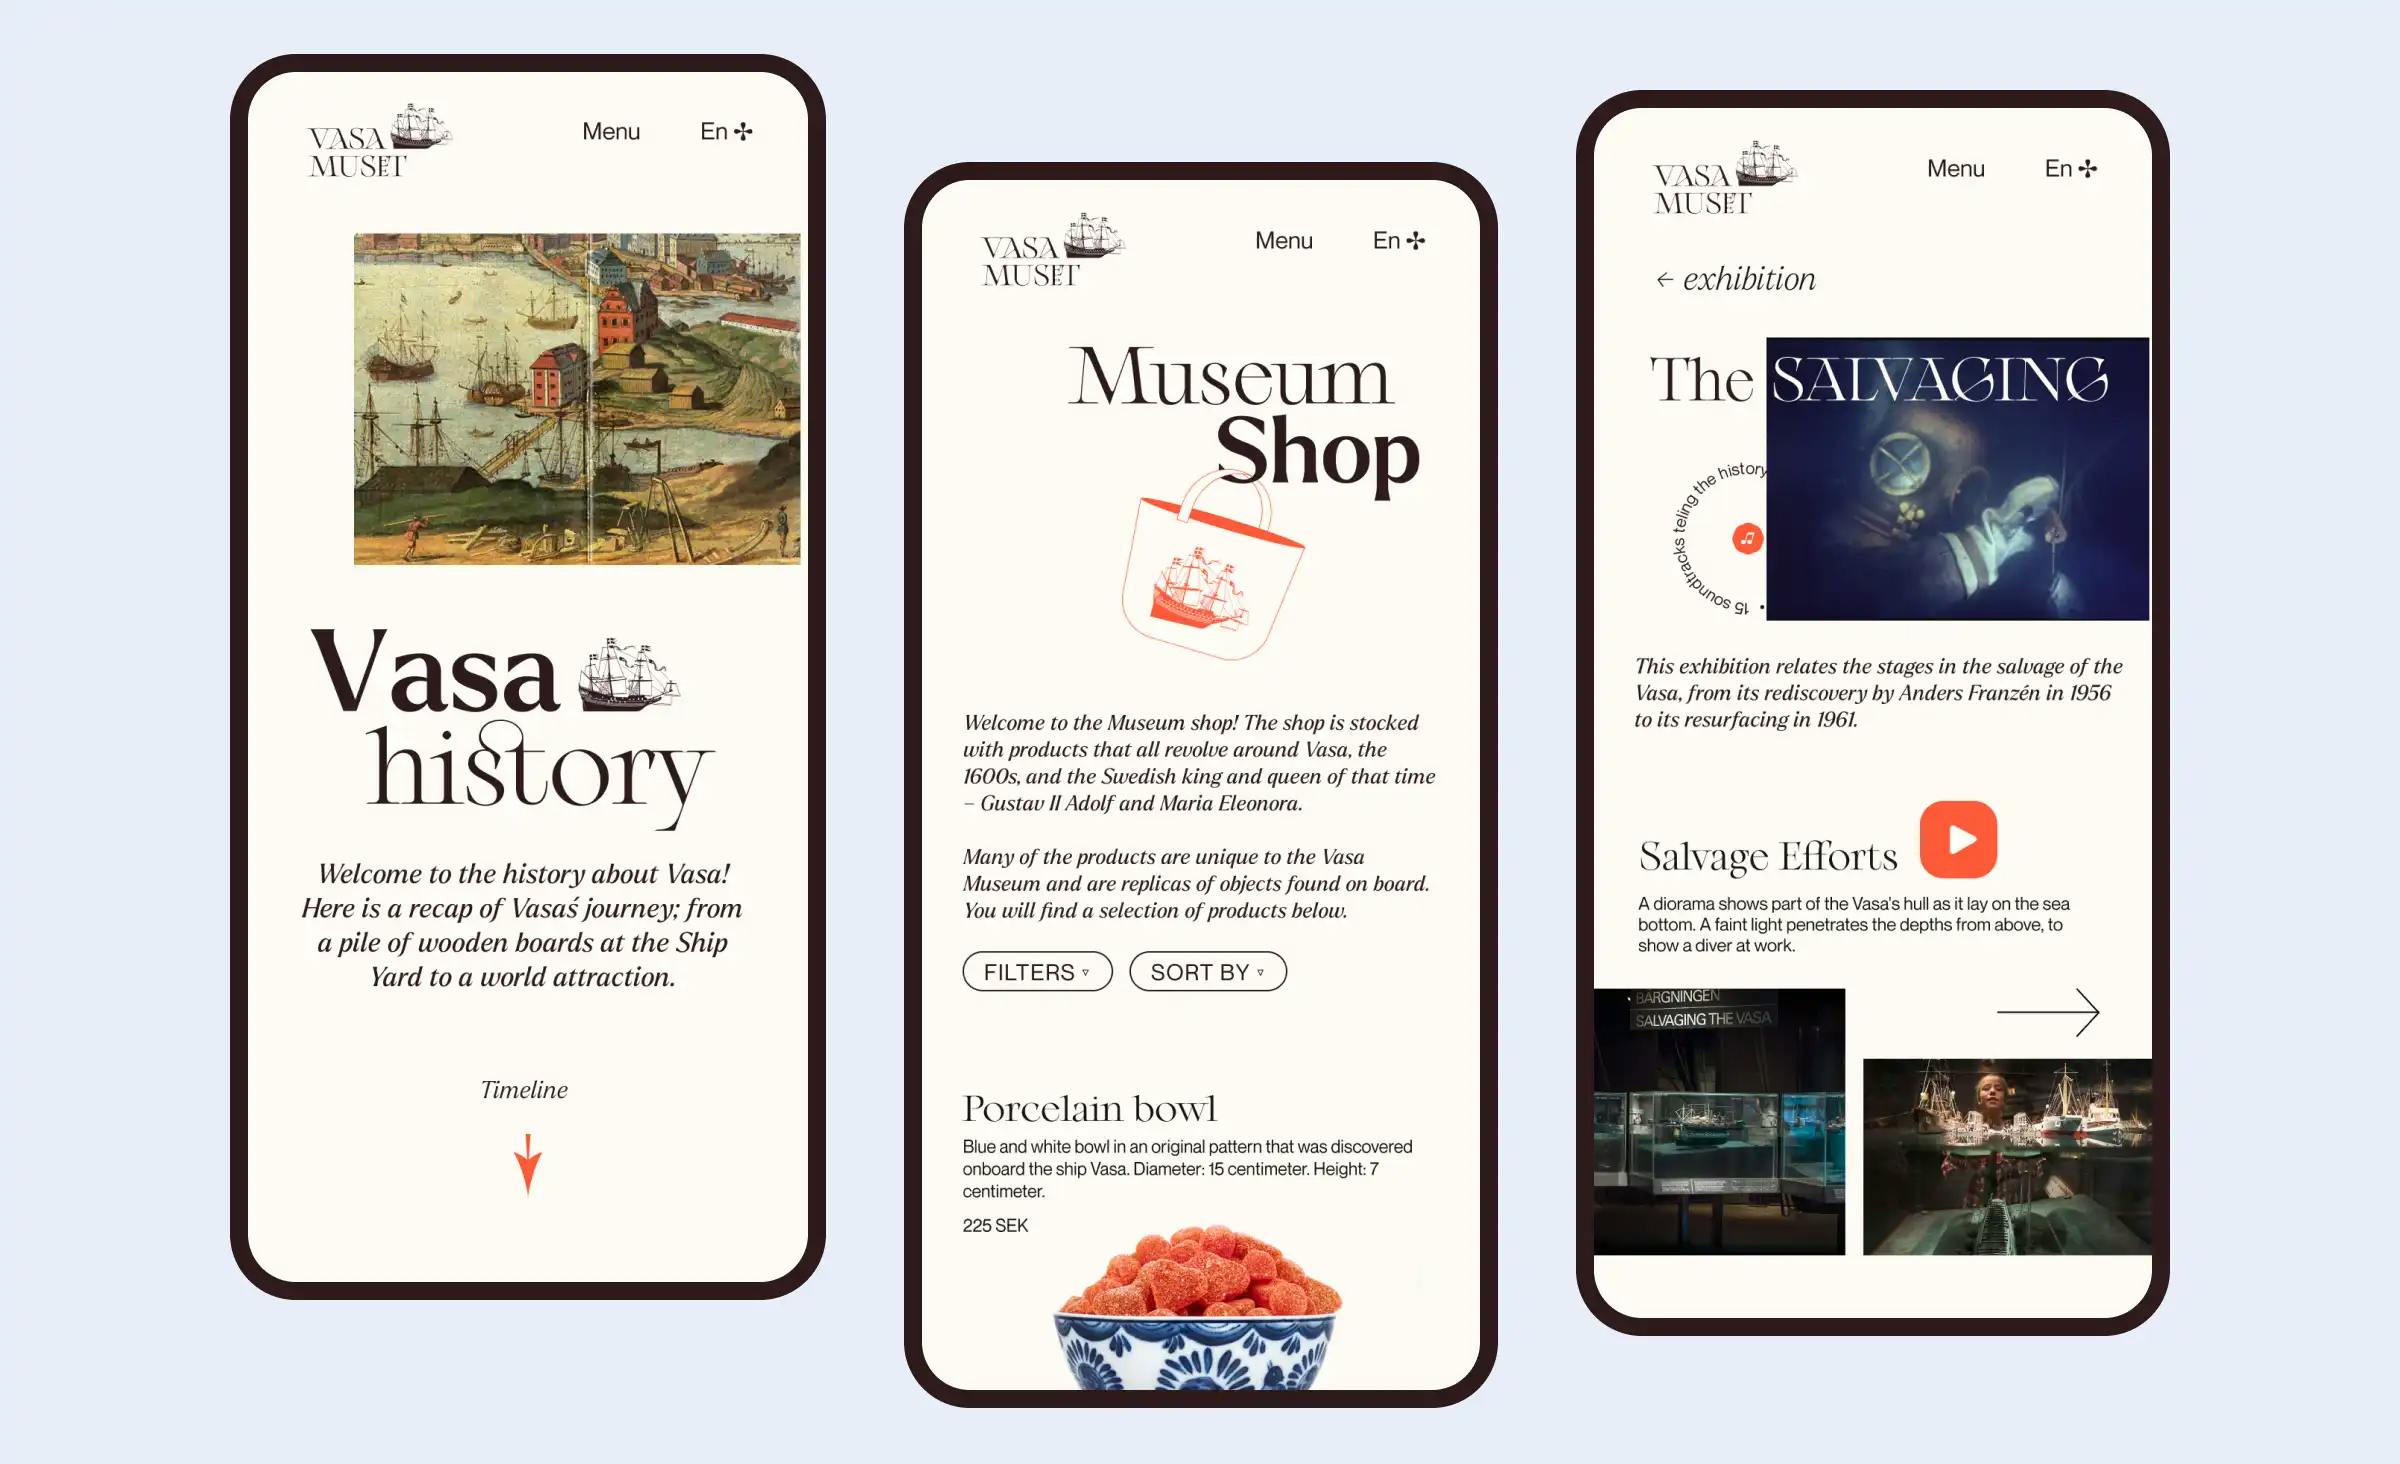 The image presents a mobile version of a web app design concept for the Vasa Museum, showcasing what entertainment software design can look like. The image features three interfaces: the first one introduces the history of the Vasa Museum, the second one represents the Museum Shop, and the third one provides details of the current exhibition.